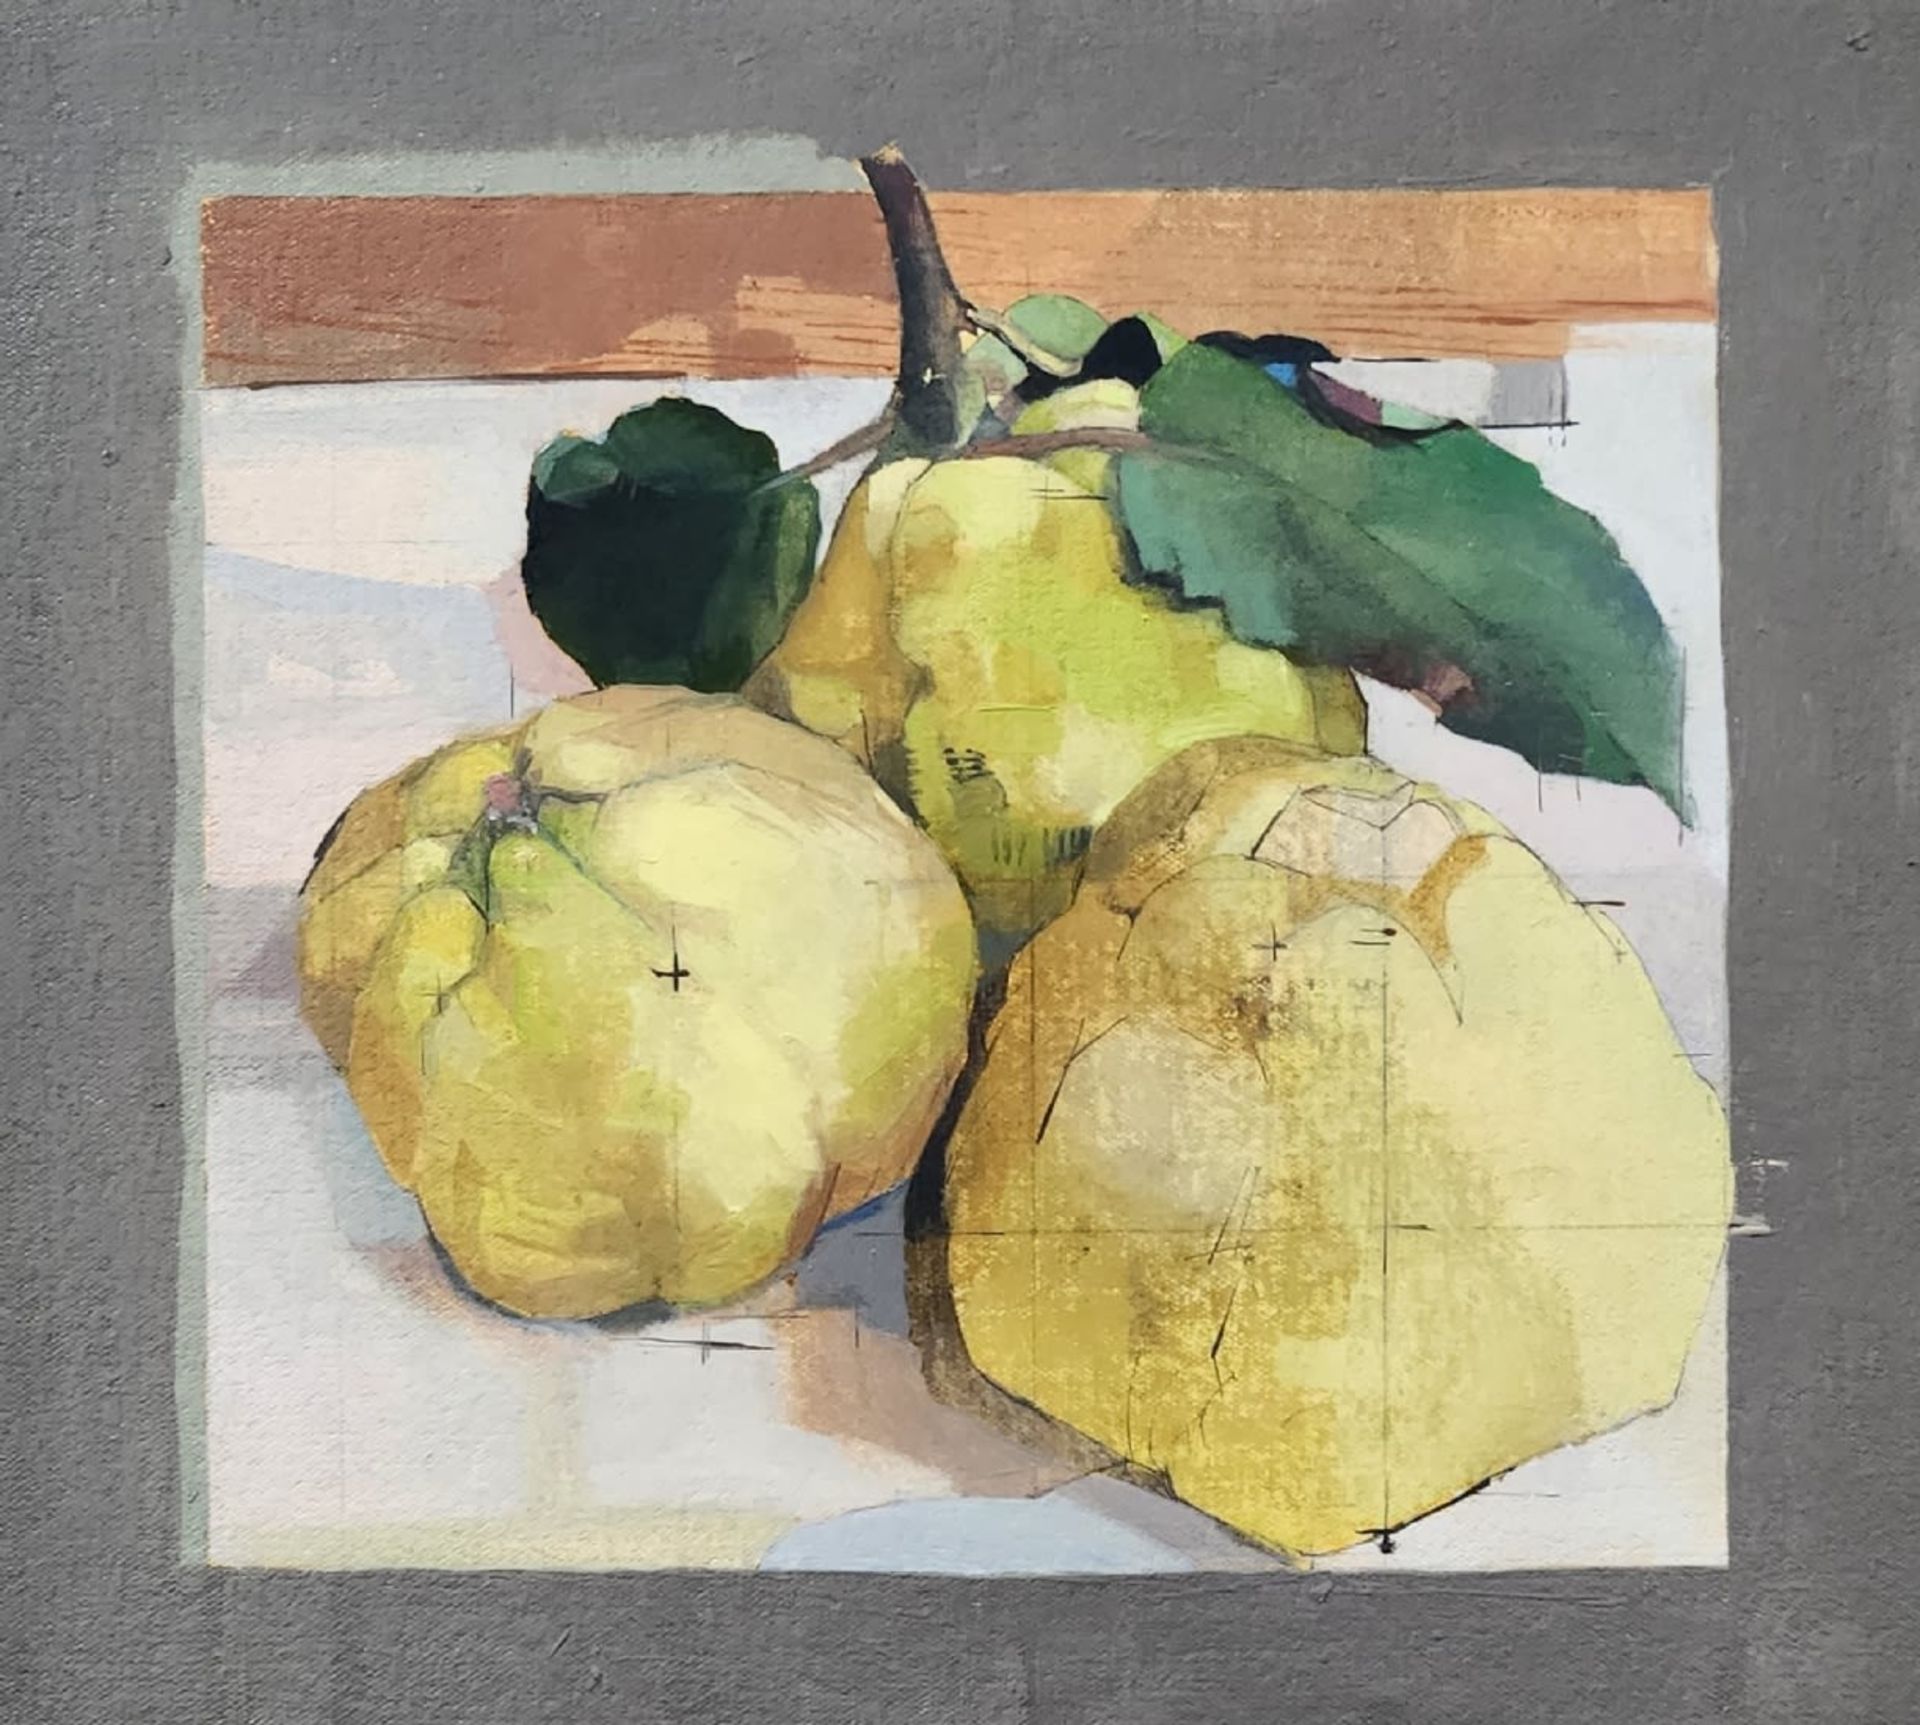 'Quince' - painting, kobi Shahar - oil on canvas attached to board, signed. Dimensions: 32x40 cm.